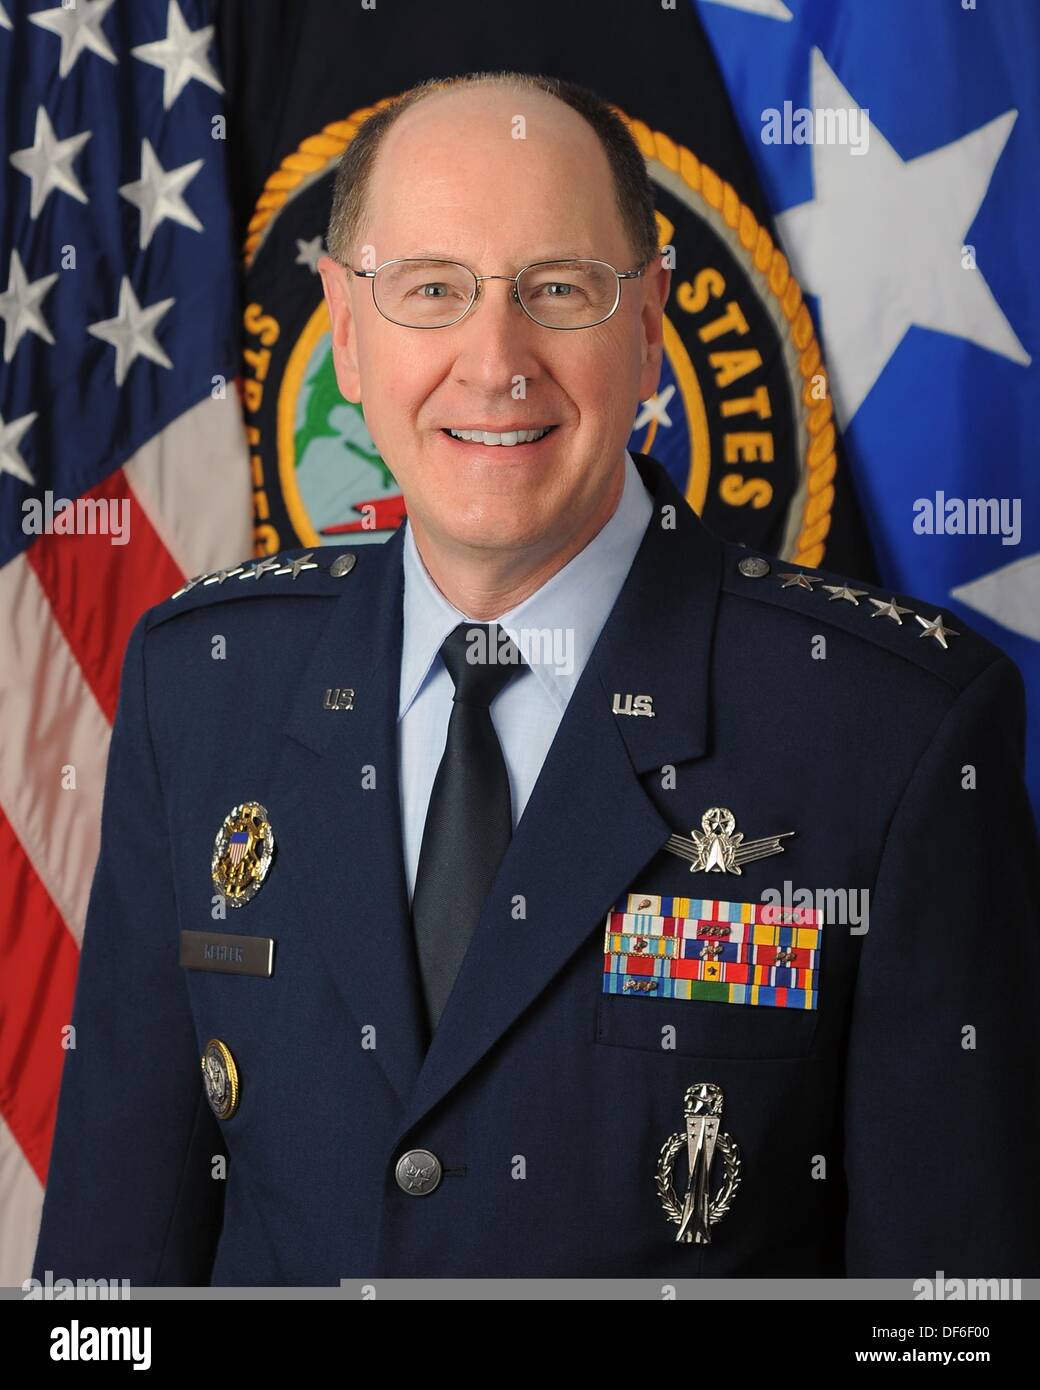 United States Air Force General C. Robert 'Bob' Kehler is Commander, U.S. Strategic Command, Offutt Air Force Base, Nebraska. He is responsible for the plans and operations for all U.S. forces conducting strategic deterrence and DoD space and cyberspace operations. General Kehler entered the Air Force in 1975 as a distinguished graduate of the Air Force ROTC program. He has commanded at the squadron, group, wing and major command levels, and has a broad range of operational and command tours in ICBM operations, space launch, space operations, missile warning and space control. He commanded a M Stock Photo